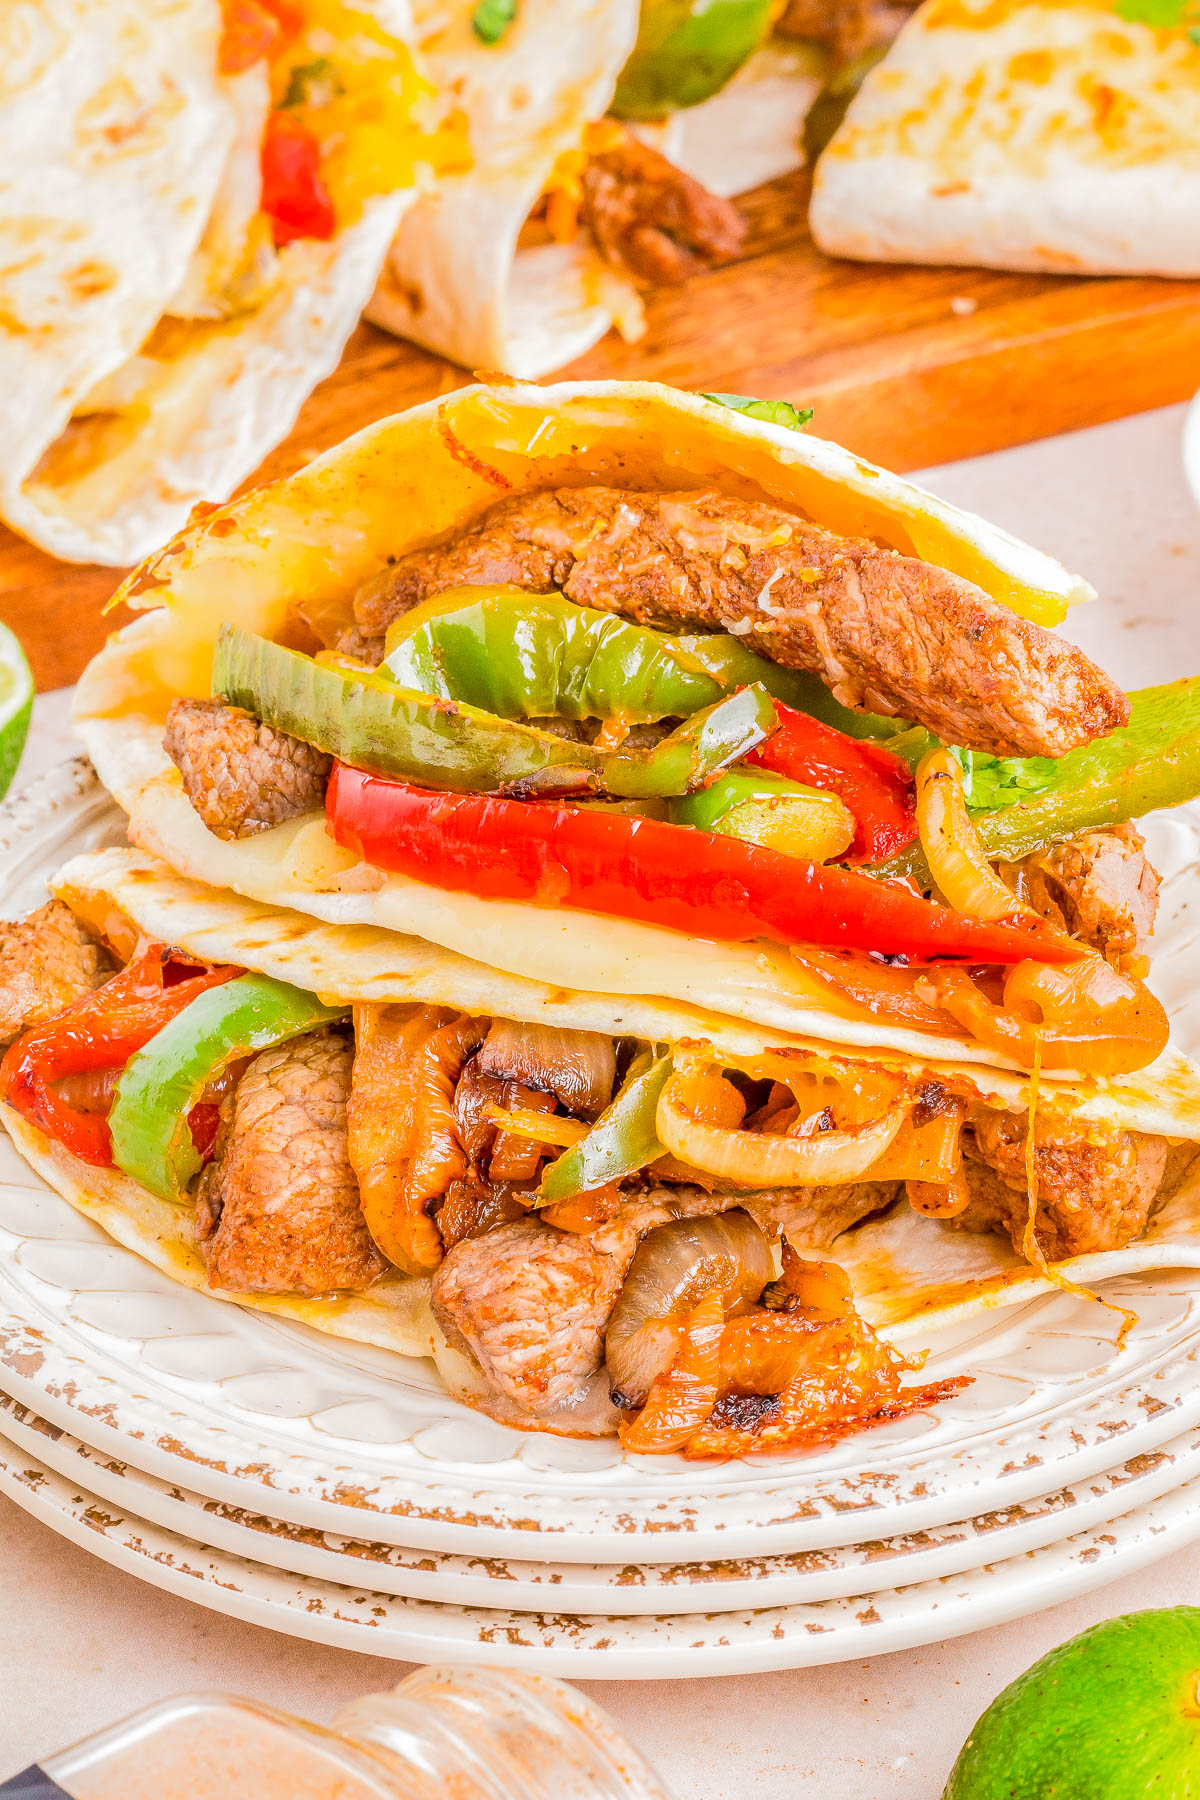 A close-up image of a steak quesadillas with colorful bell peppers, onions, and melted cheese in a soft tortilla, served on a white plate.